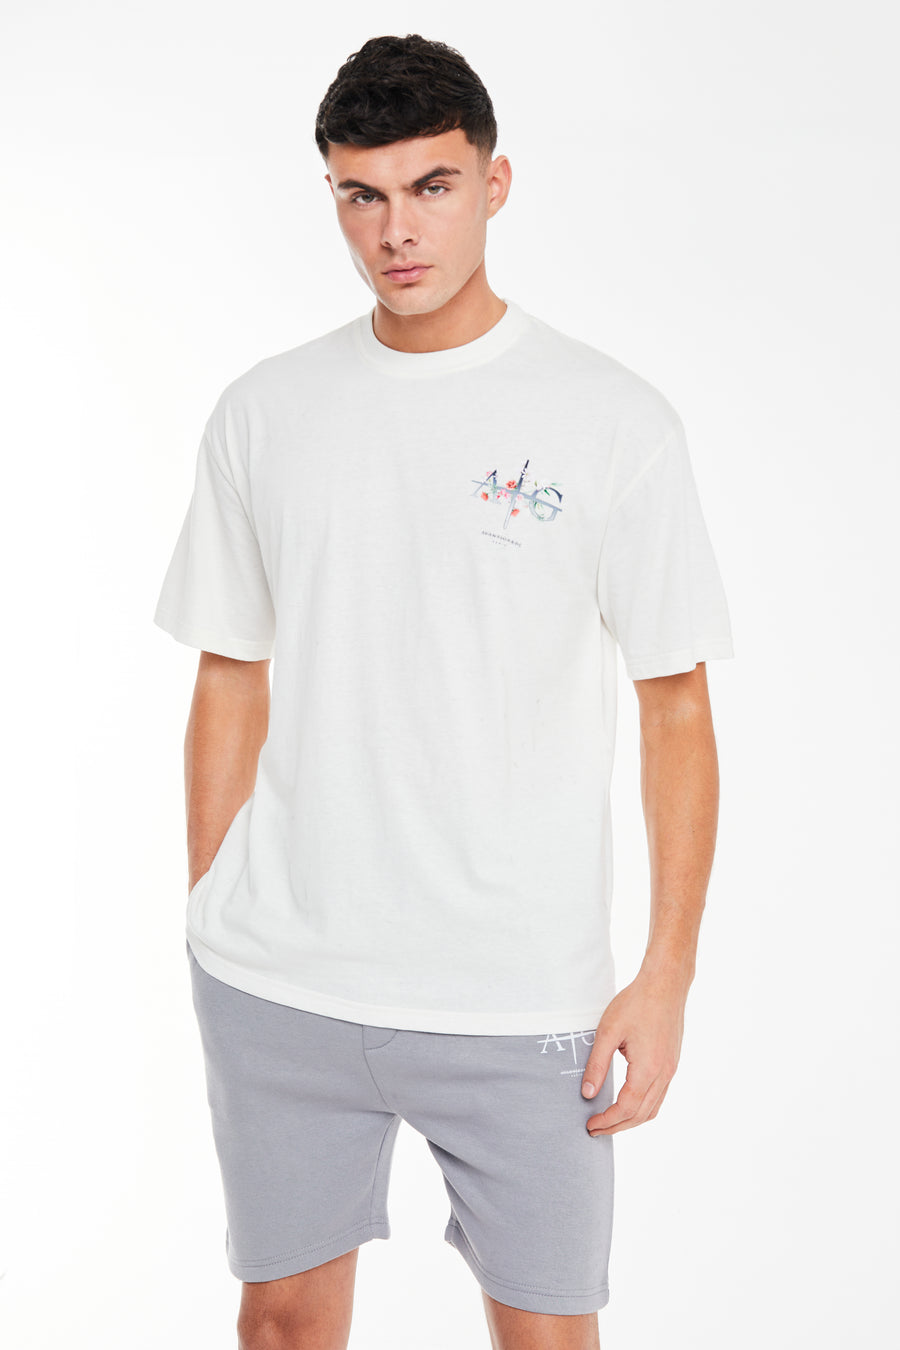 T-shirt for men on sale in white with 'Avant Garde Paris' logo on chest